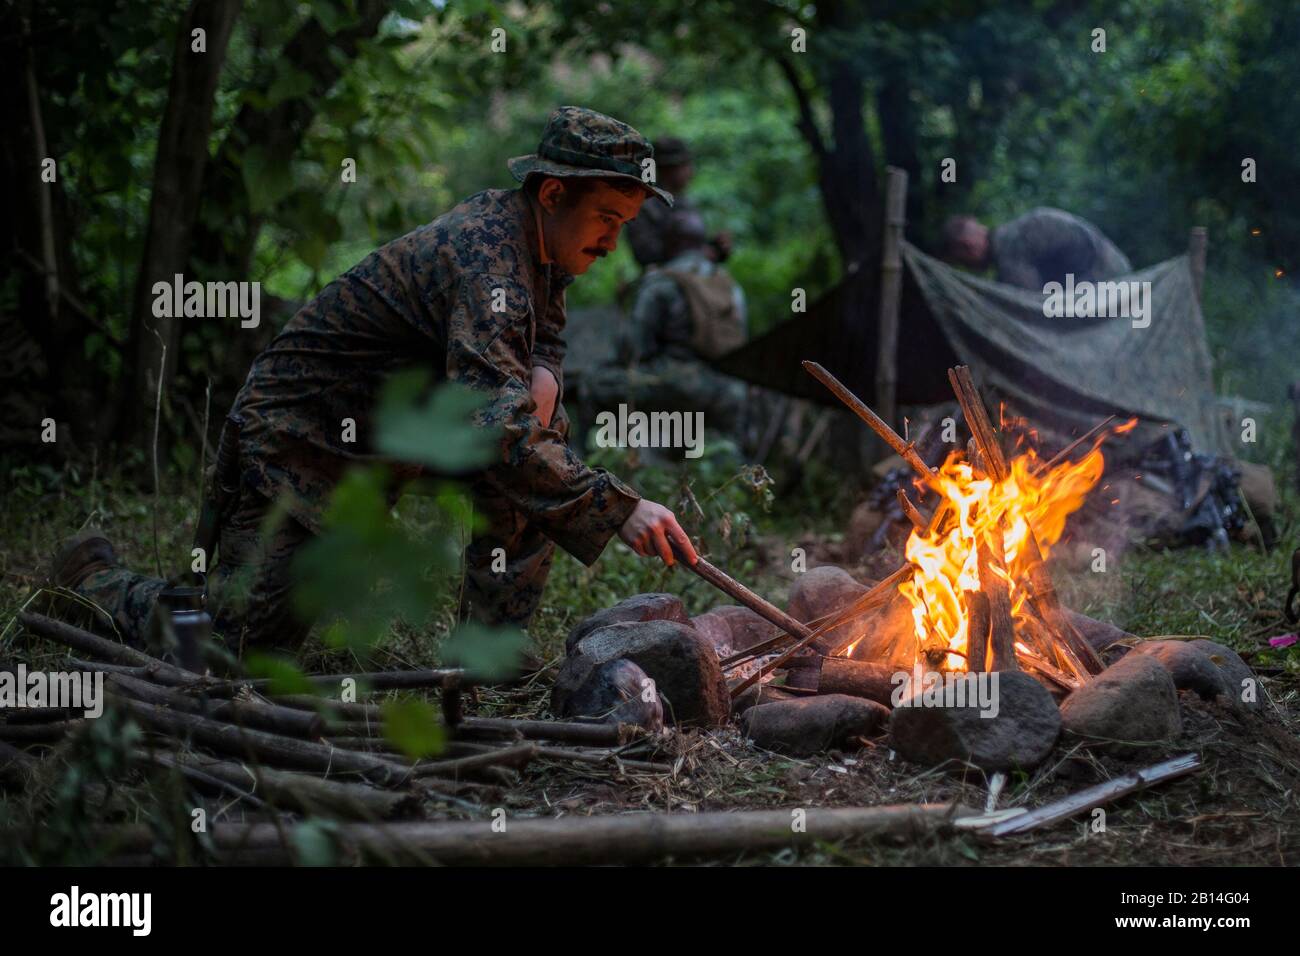 U.S. Navy Petty Officer 3rd Class Andrew Mercier builds a fire during jungle survival training during exercise KAMANDAG 2 in Ternate, Cavite, Philippines, Oct. 2, 2018. Mercier, a South Burlington, Virginia, native, is assigned to Echo Company, 2nd Battalion, 5th Marine Regiment. (U.S. Marine Corps photo by Sgt. Mackenzie Carter) Stock Photo